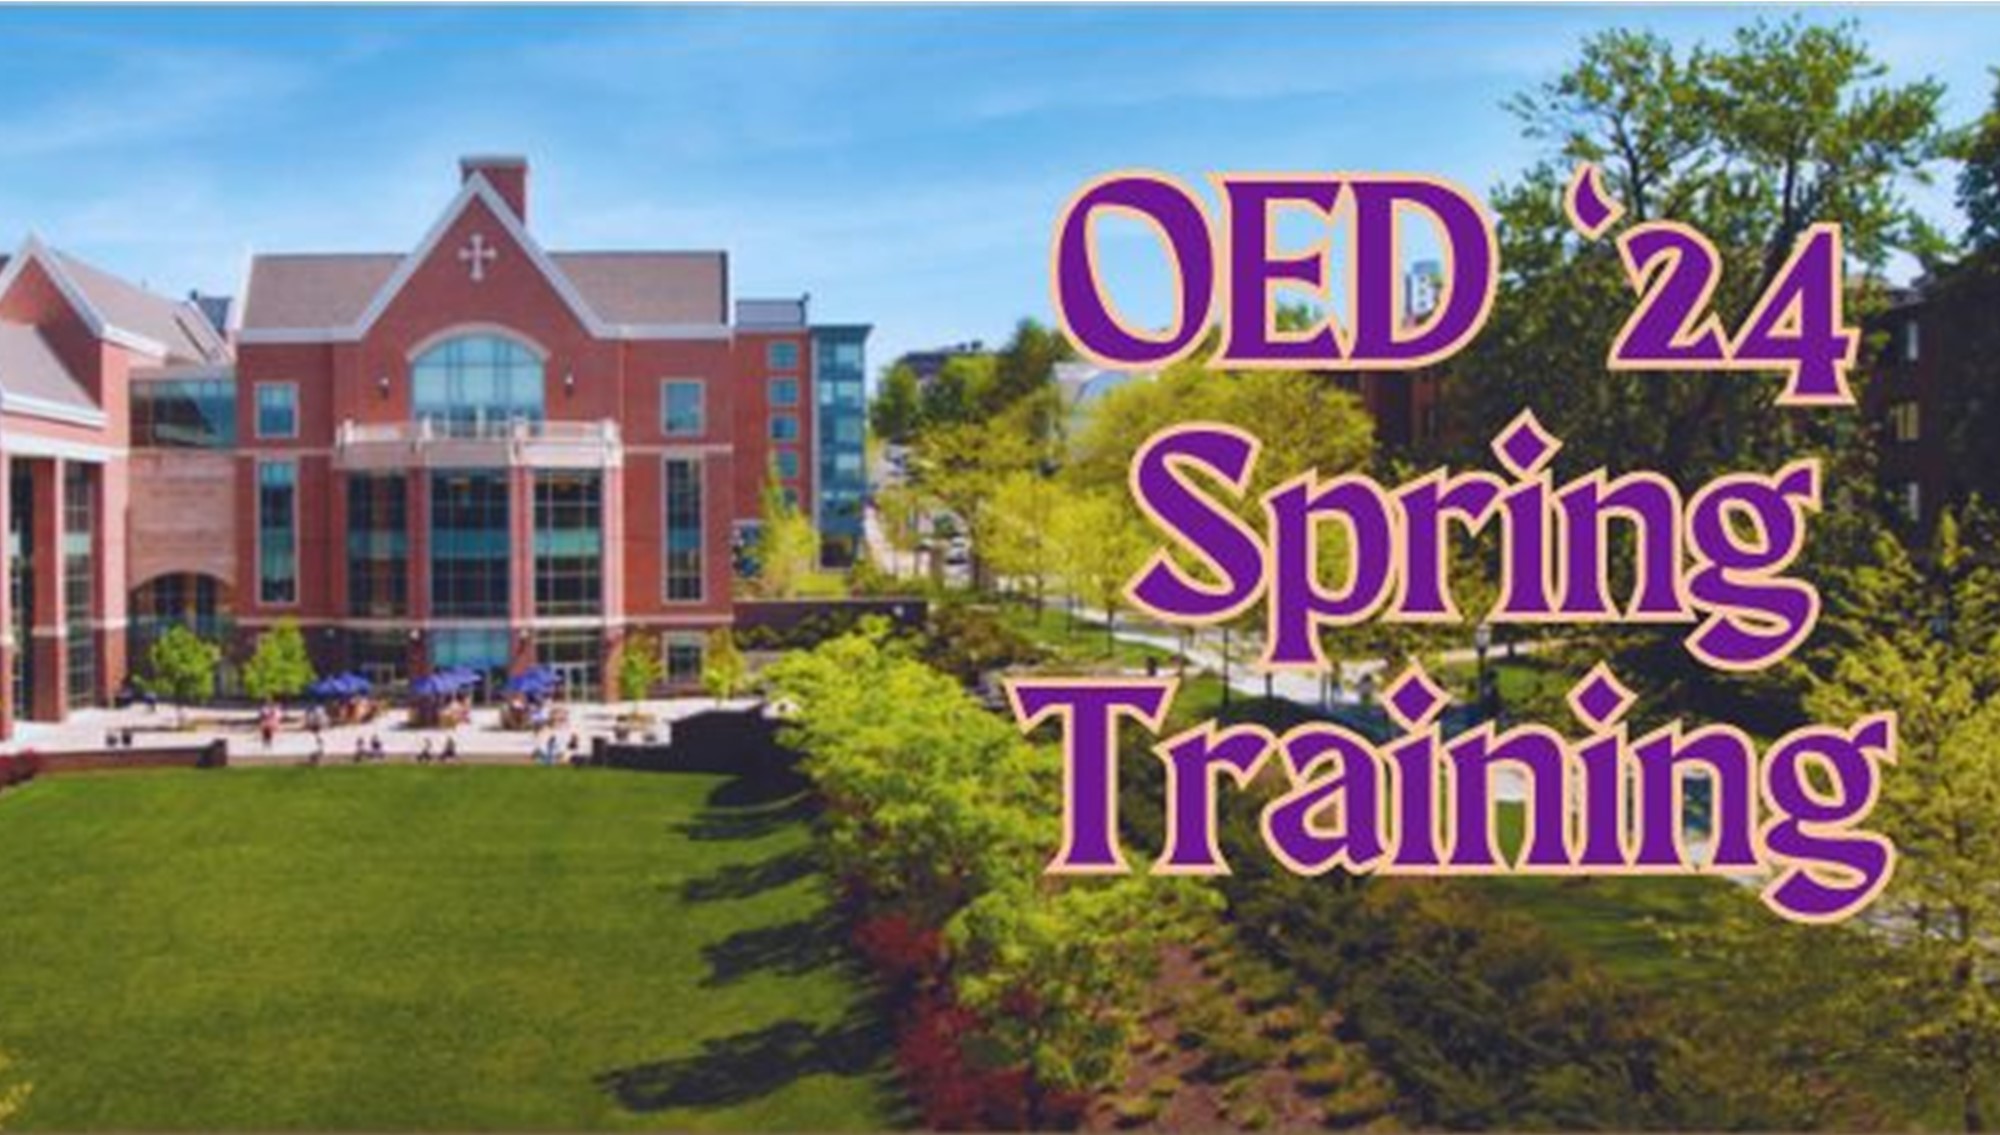 Office of Equity and Diversity Offers Spring Training image